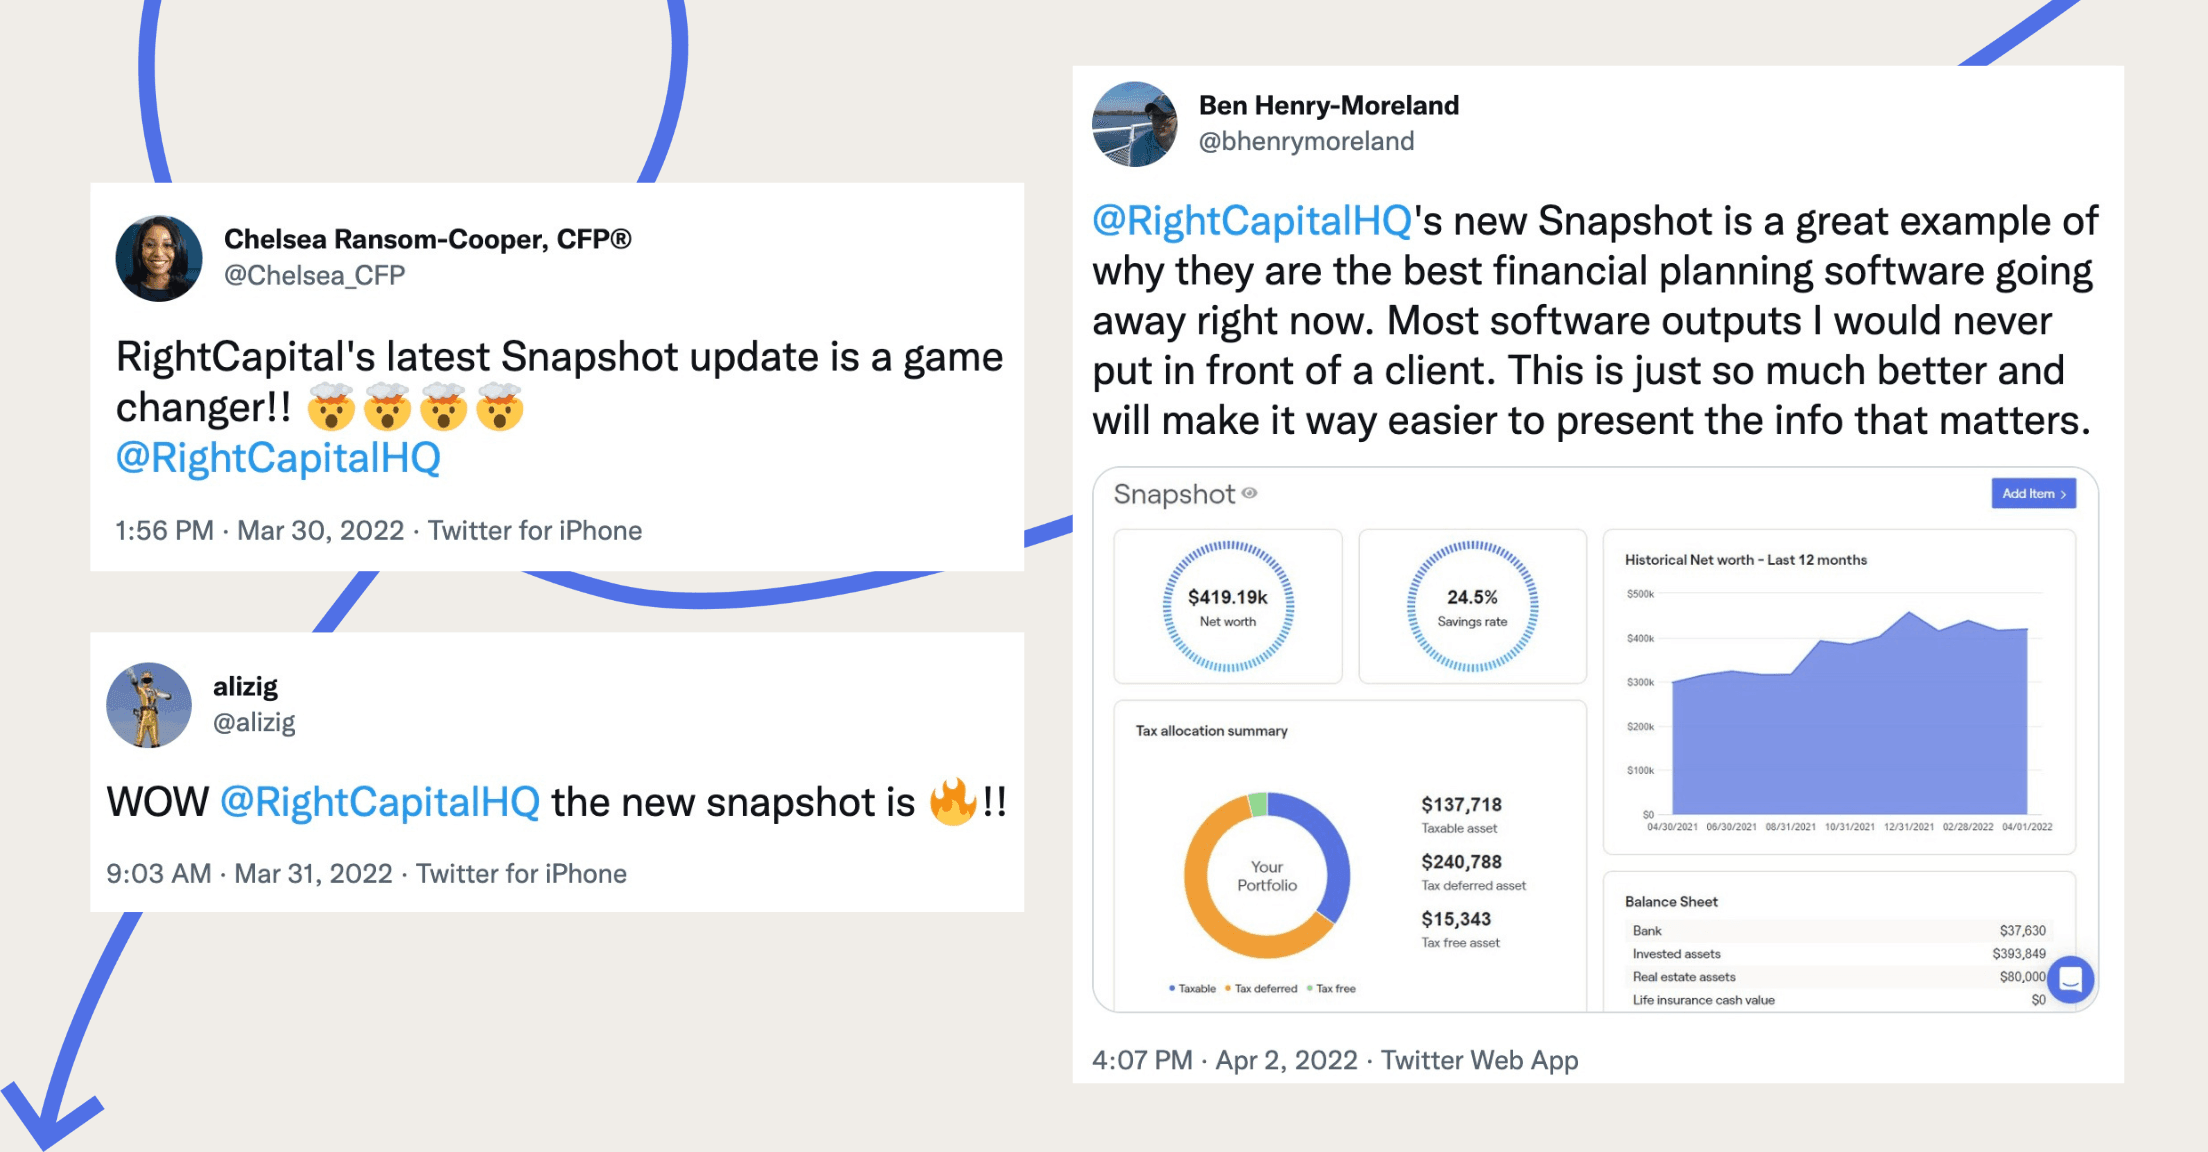 Tweets about how much advisors love the new Snapshot feature from RightCapital